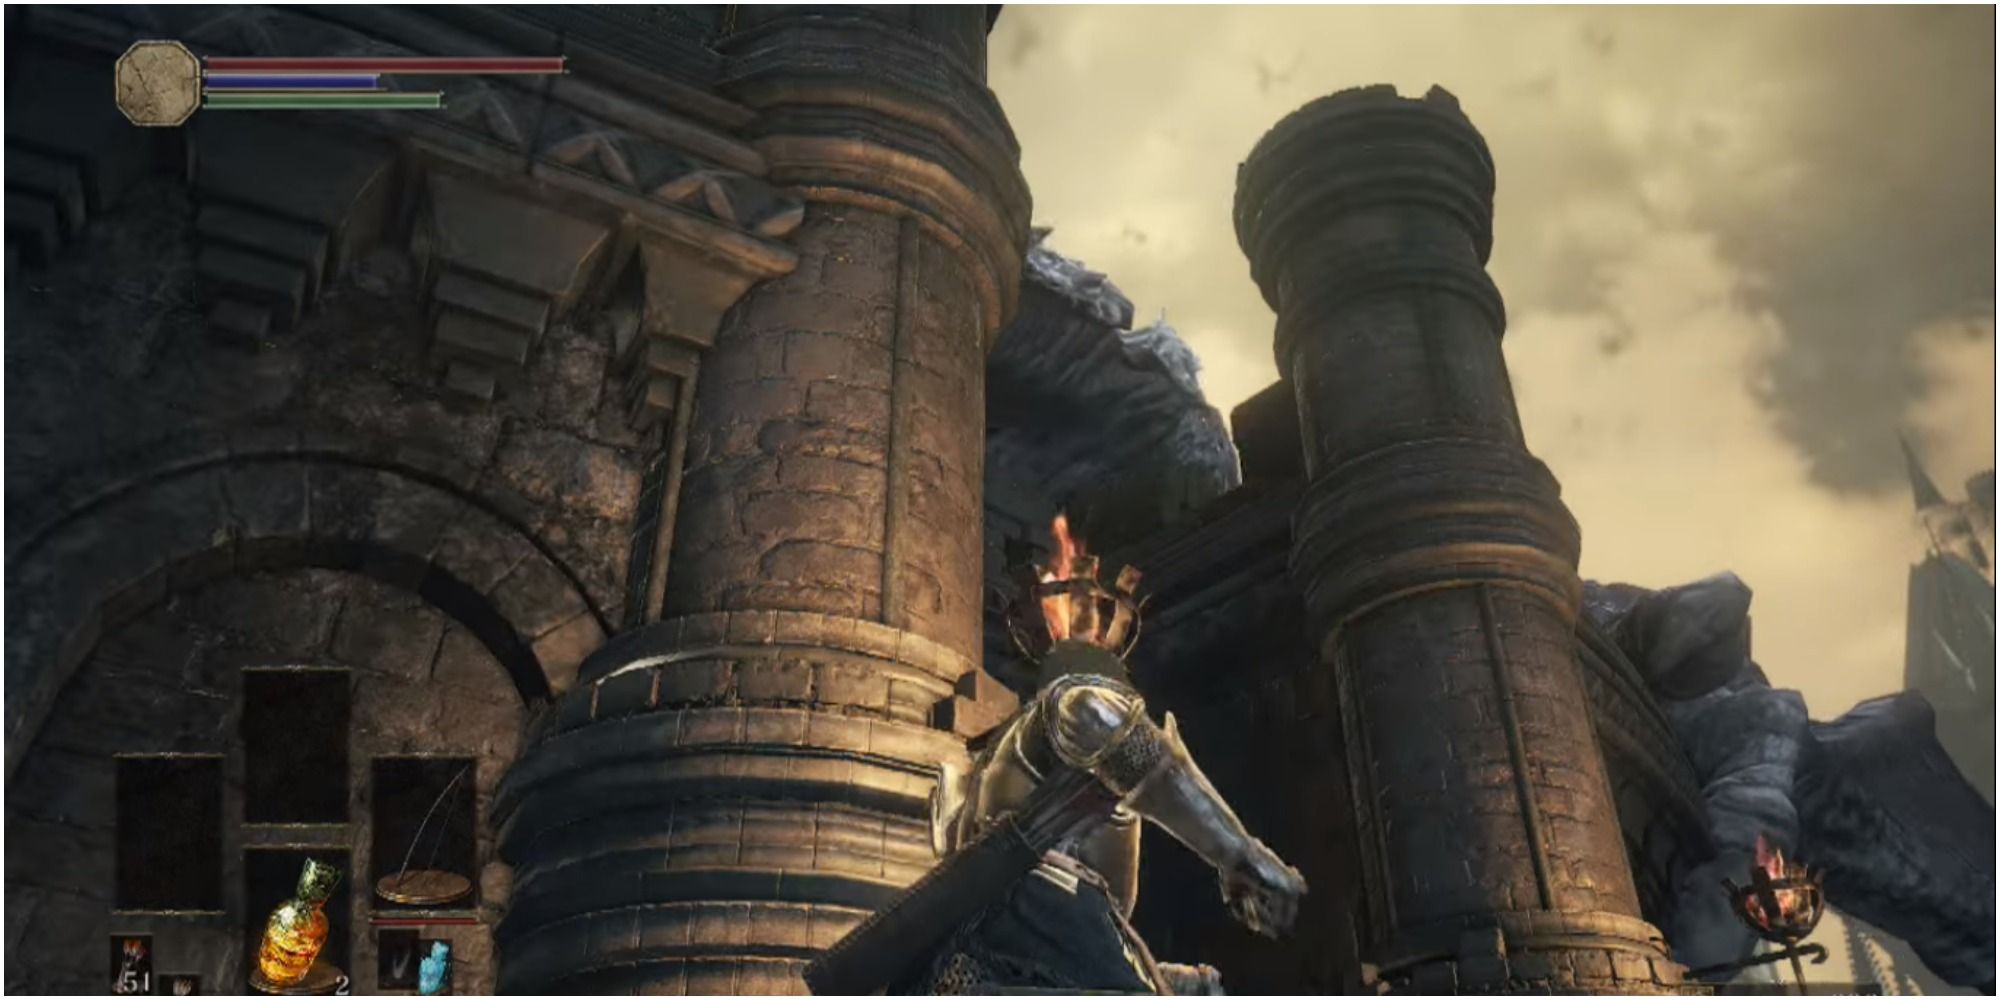 The player facing towards the Lothric Wyvern.